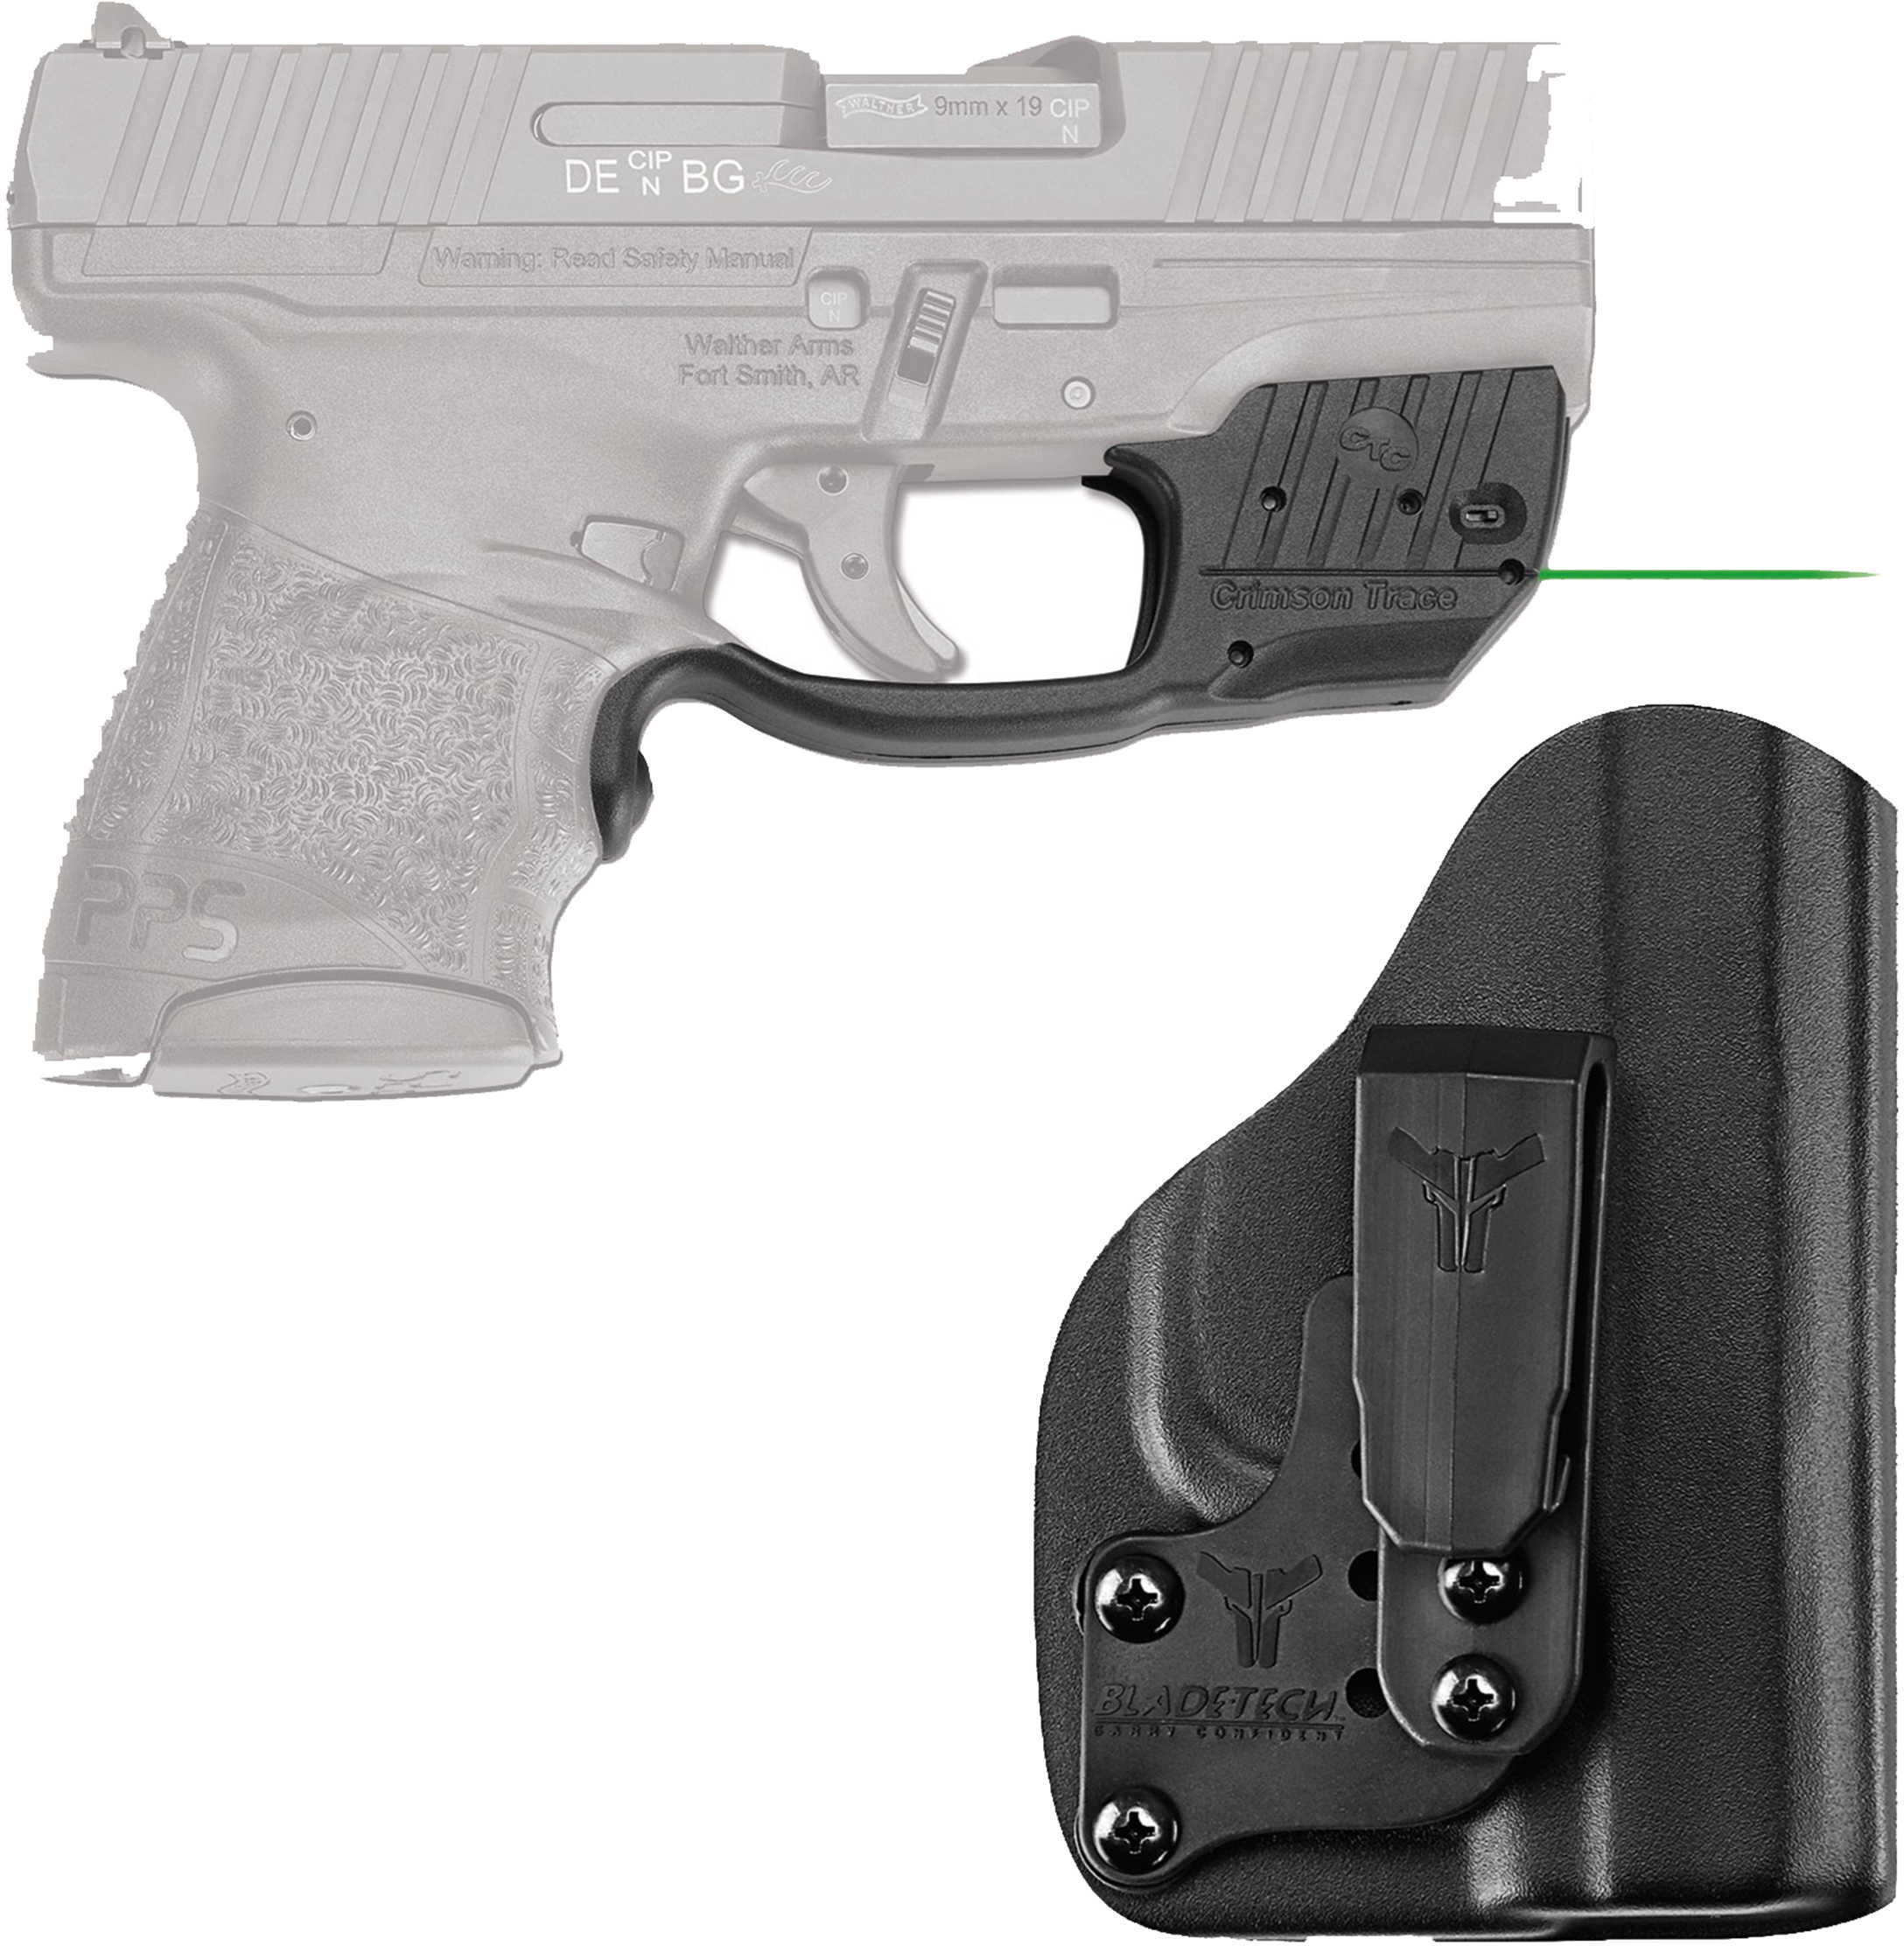 Crimson Trace Laserguard Walther PPS M2 Green with Blade Tech Holster Boxed Md: LG-482G-HBT